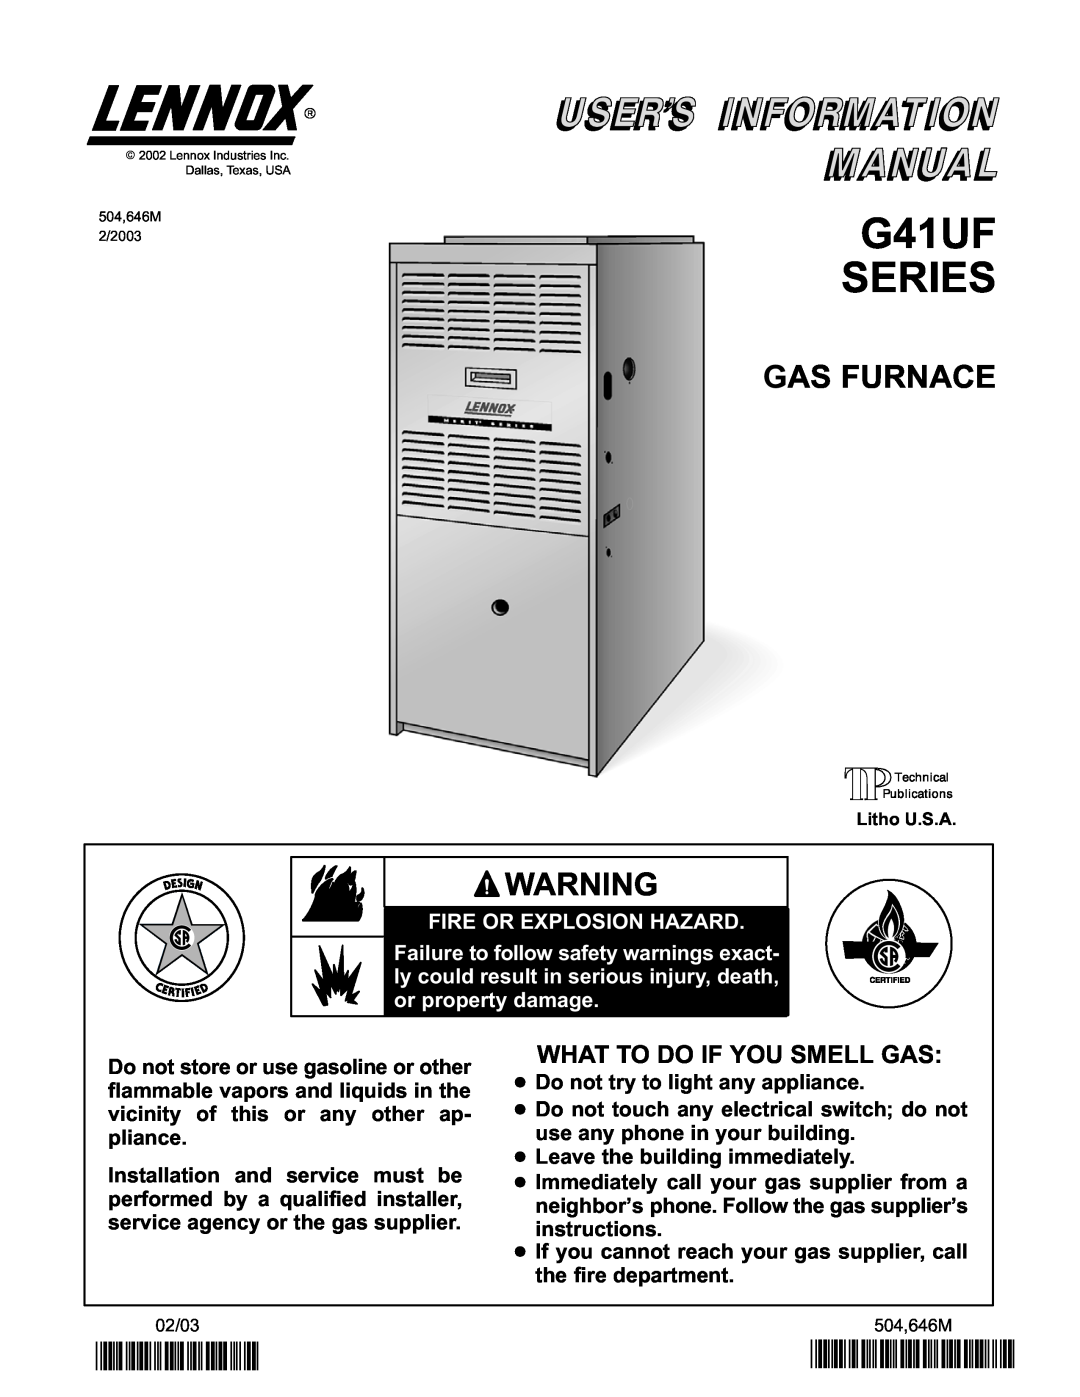 Lenoxx Electronics manual G41UF SERIES, Gas Furnace, 2P0203, P504646M, What To Do If You Smell Gas 